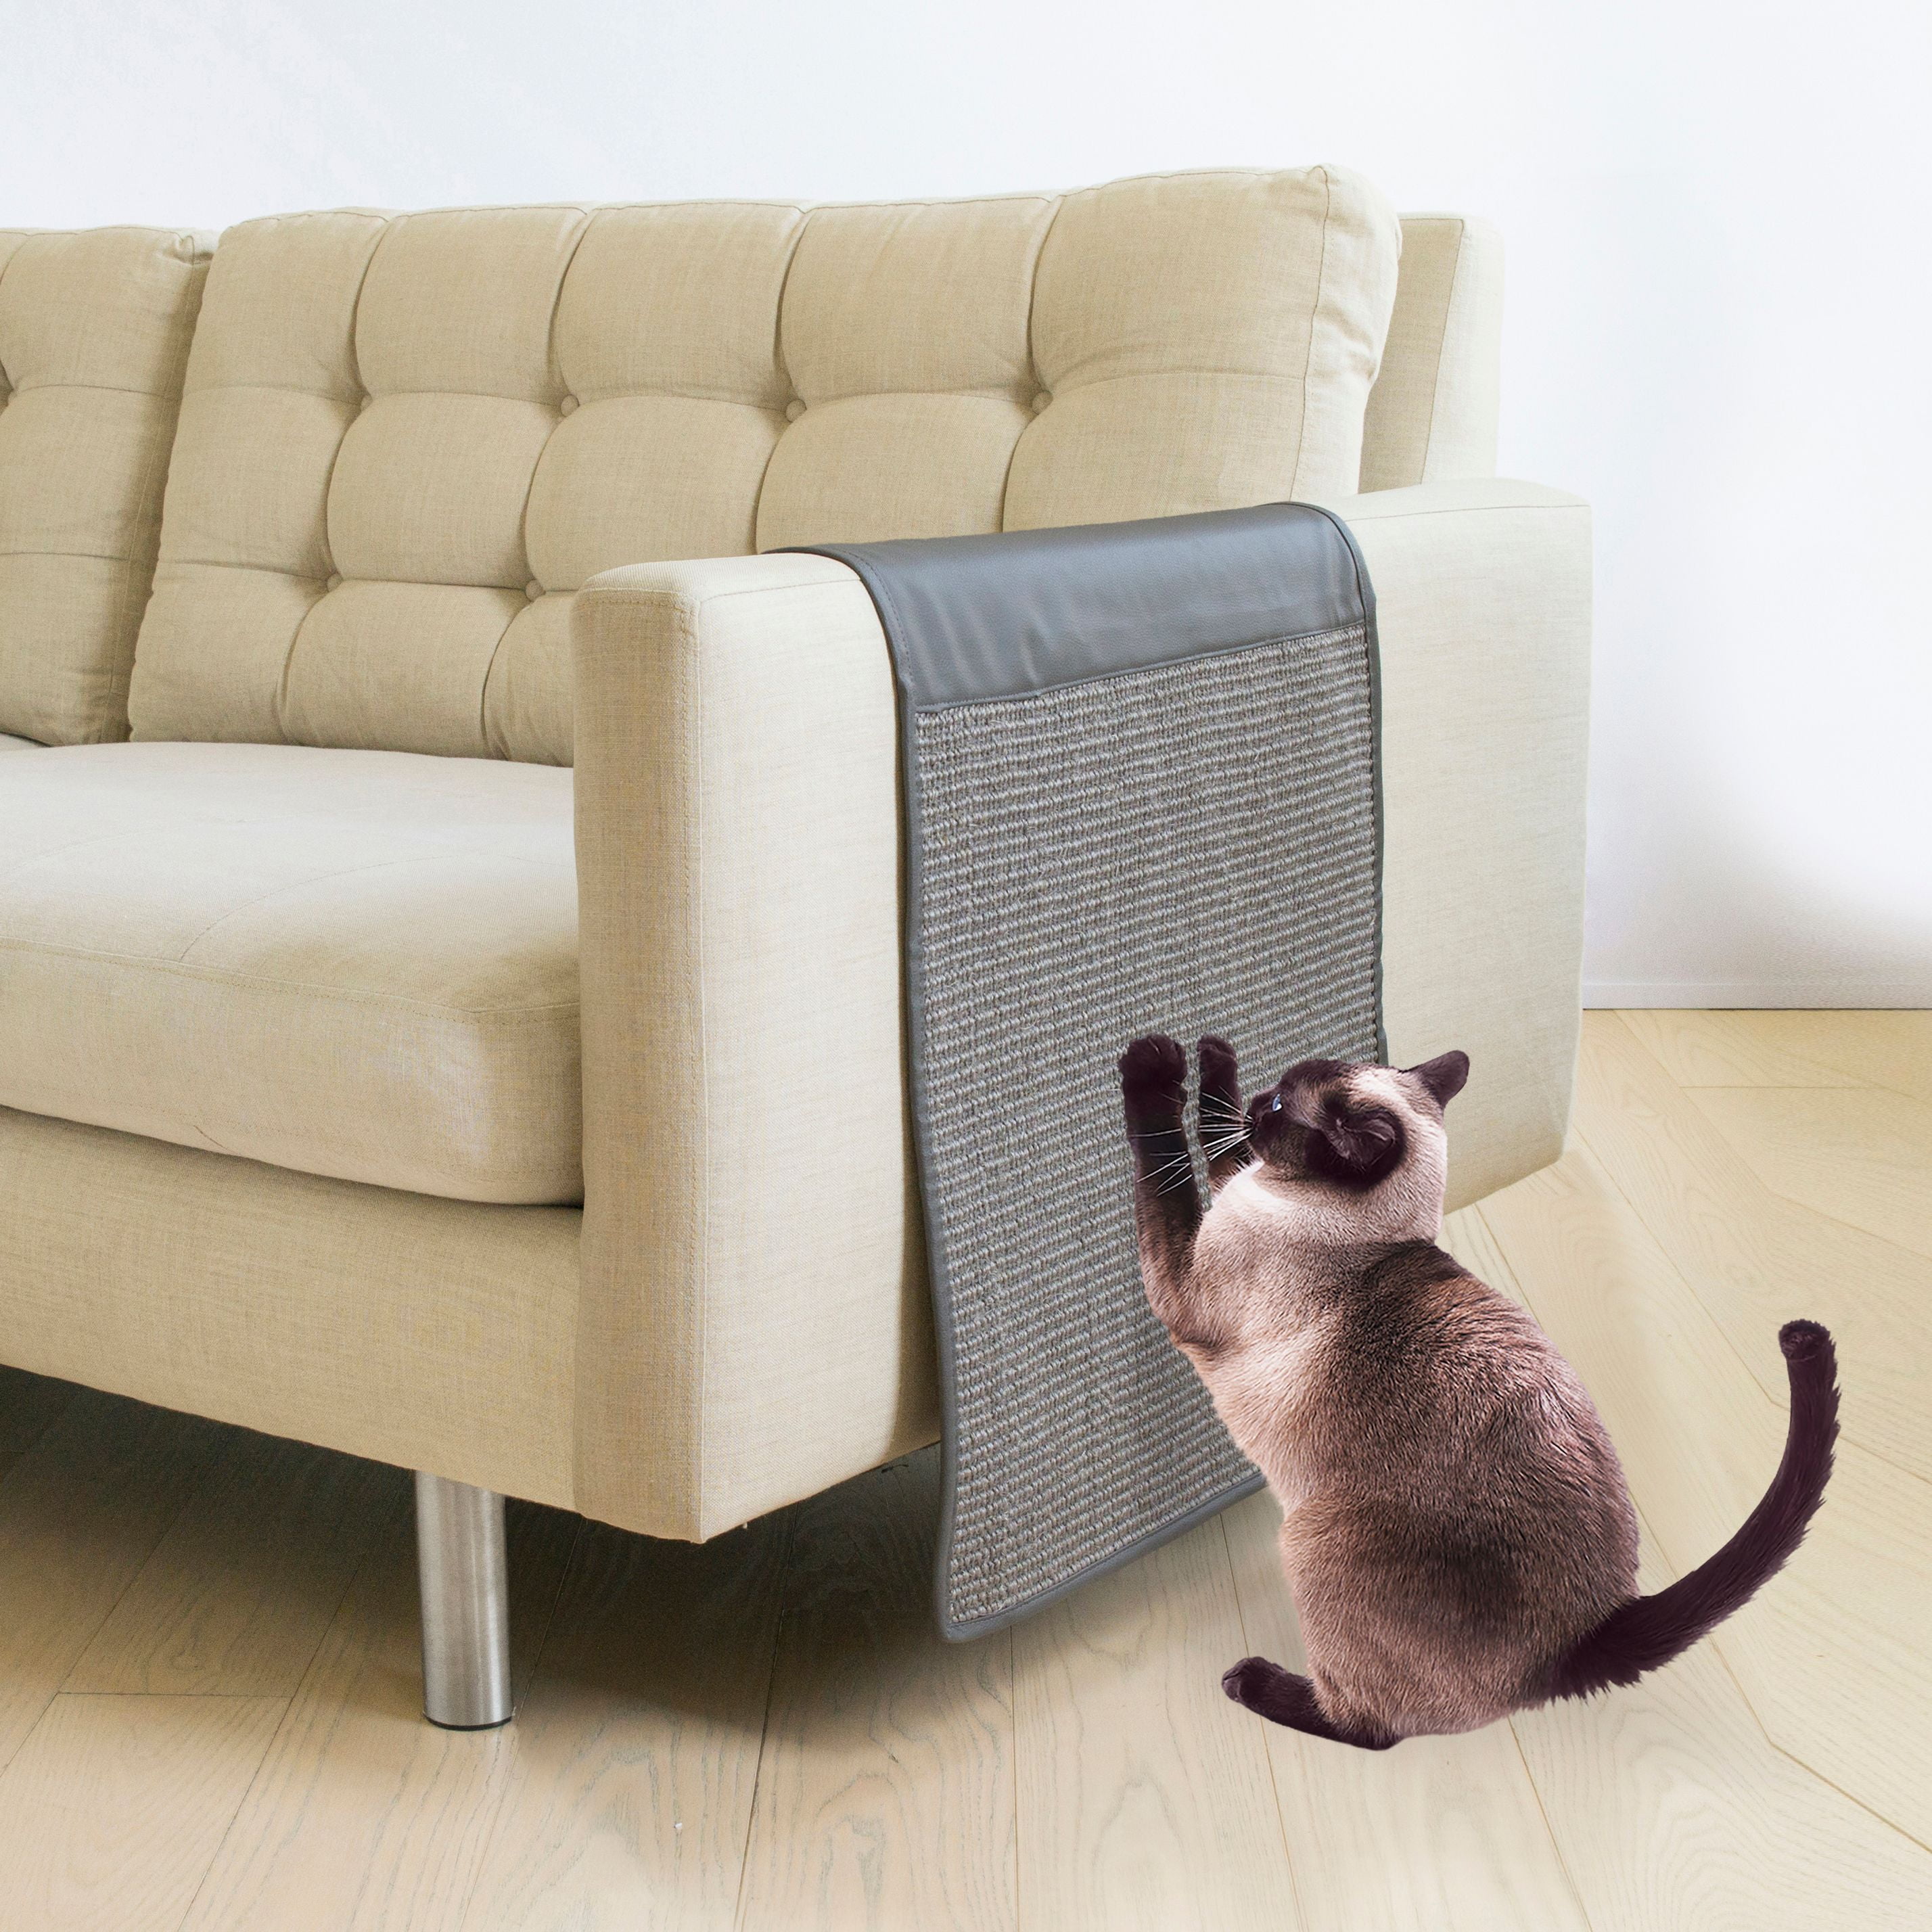 Precious Tails Cat Scratching Sofa, Can I Have Leather Furniture With Cats